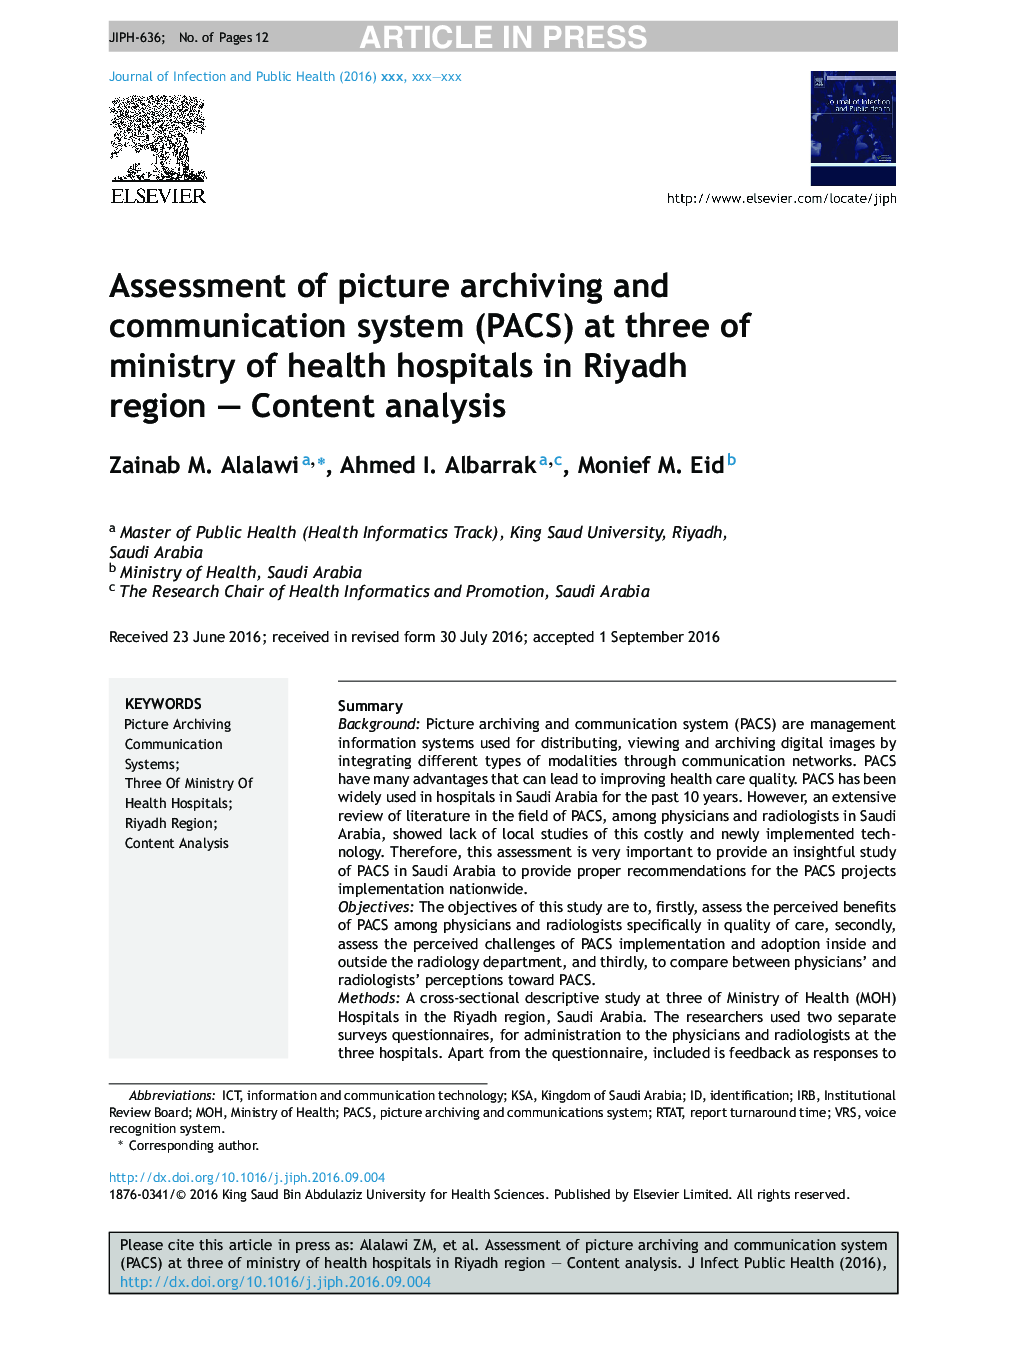 Assessment of picture archiving and communication system (PACS) at three of ministry of health hospitals in Riyadh region - Content analysis